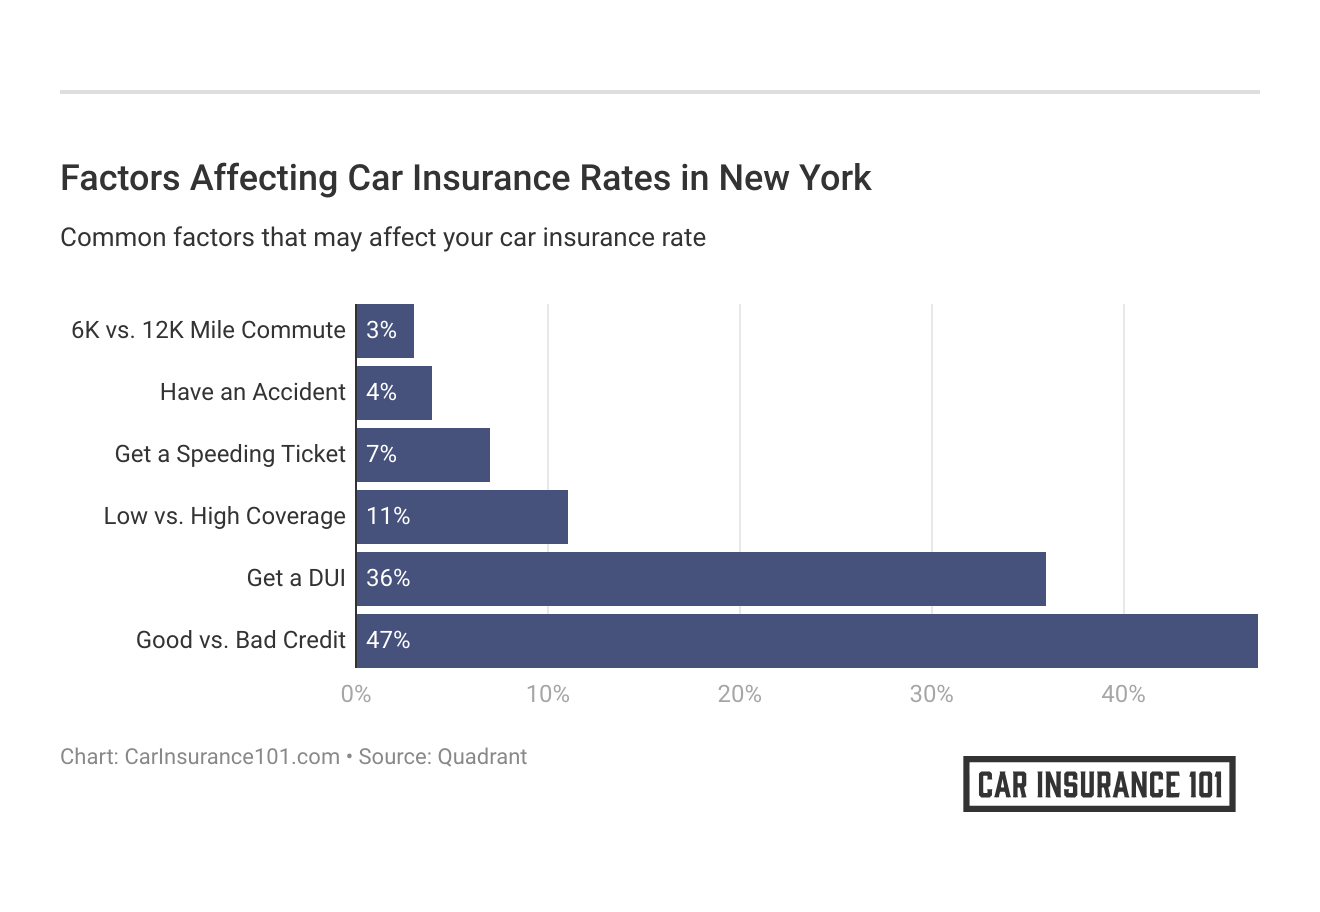 <h3>Factors Affecting Car Insurance Rates in New York</h3>